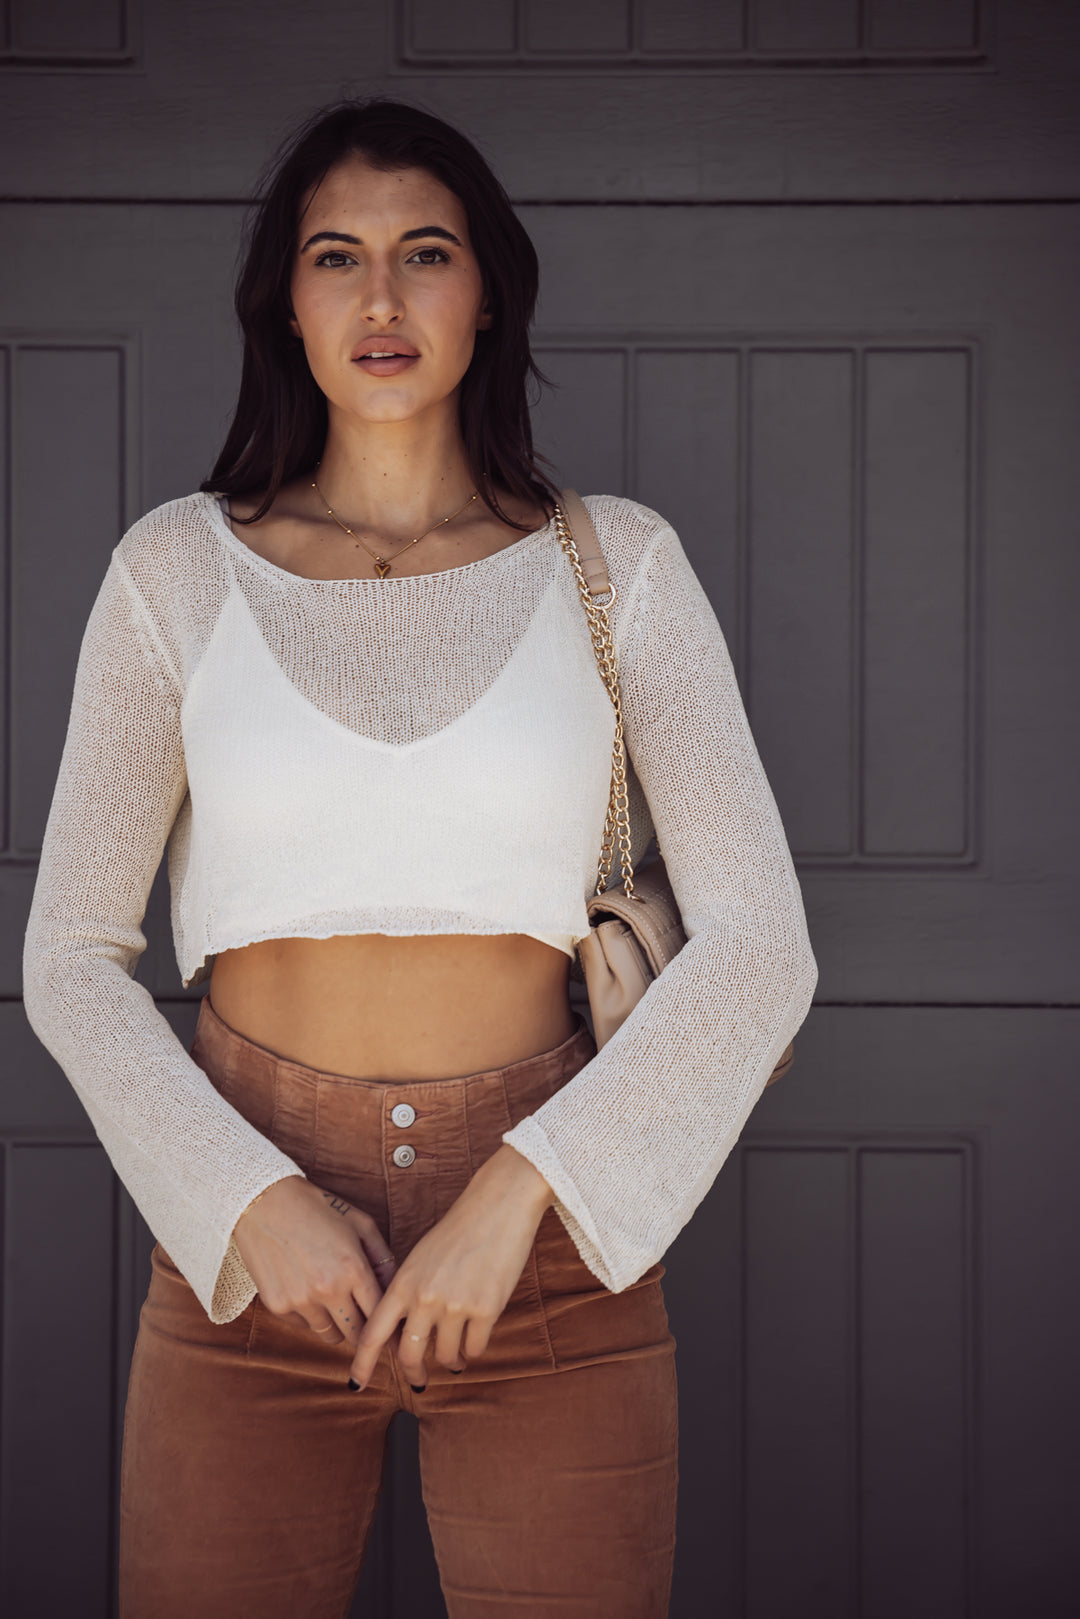 CITY SIDE CROCHET CROPPED COVER UP SWEATER - CREAM